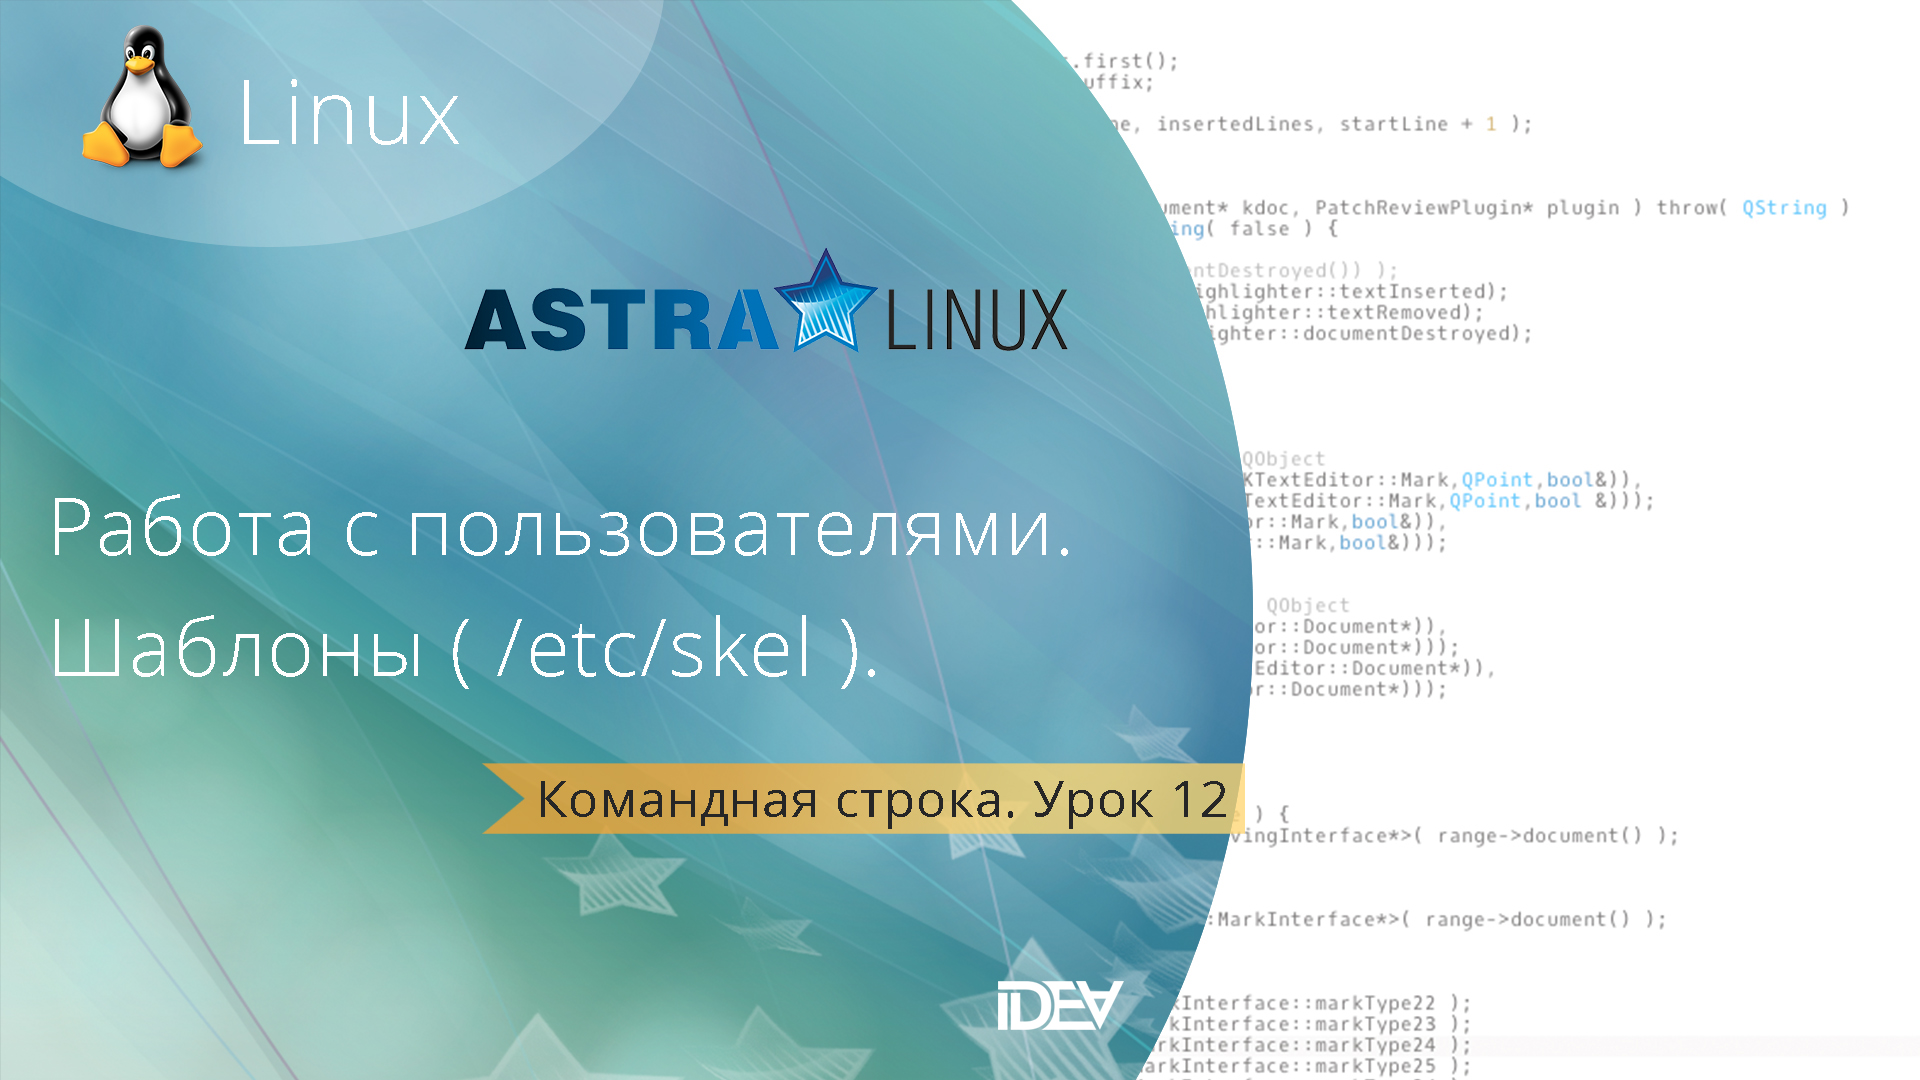 Astra linux 1.7 2. Astra Linux Интерфейс. Astra Linux 1.4.